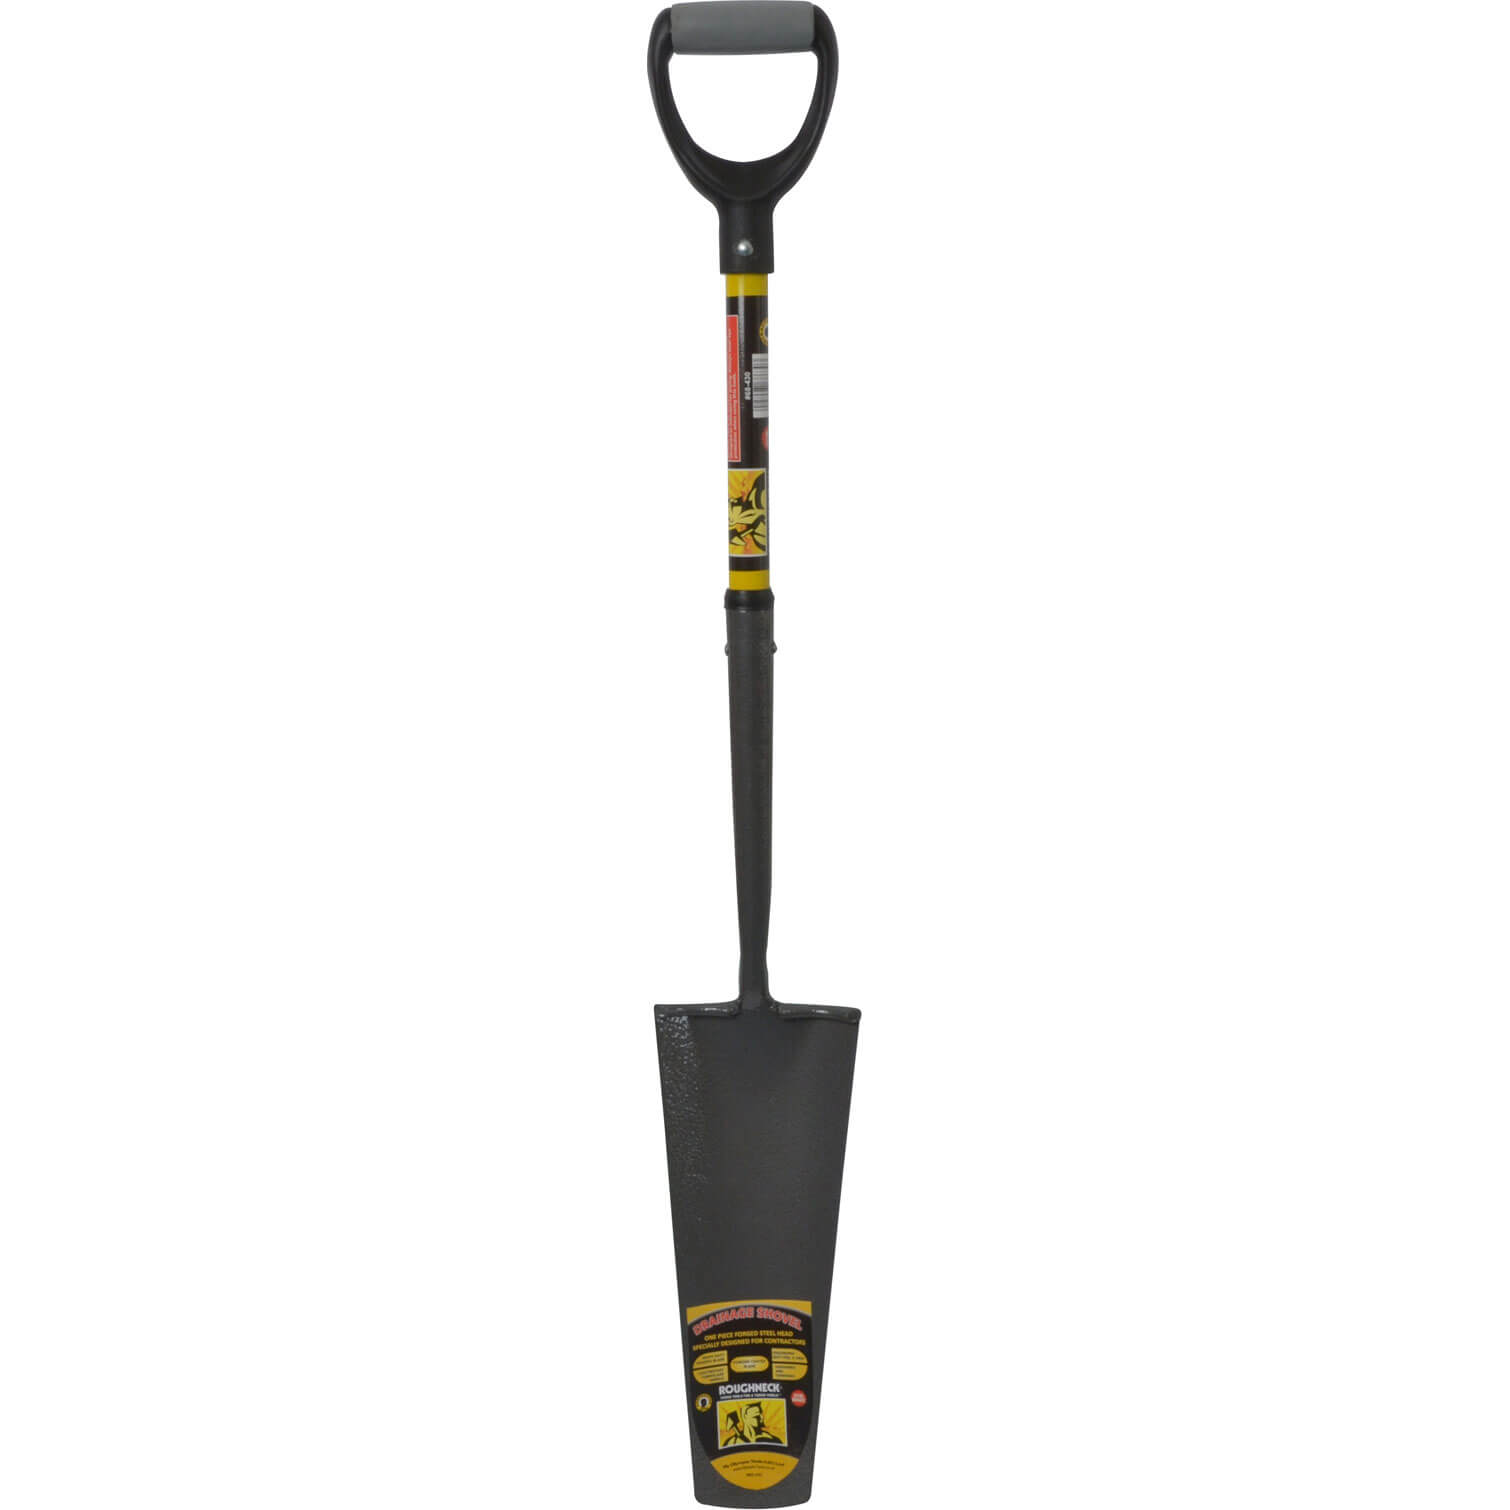 Roughneck Steel Draining Shovel with Fibre Glass Handle